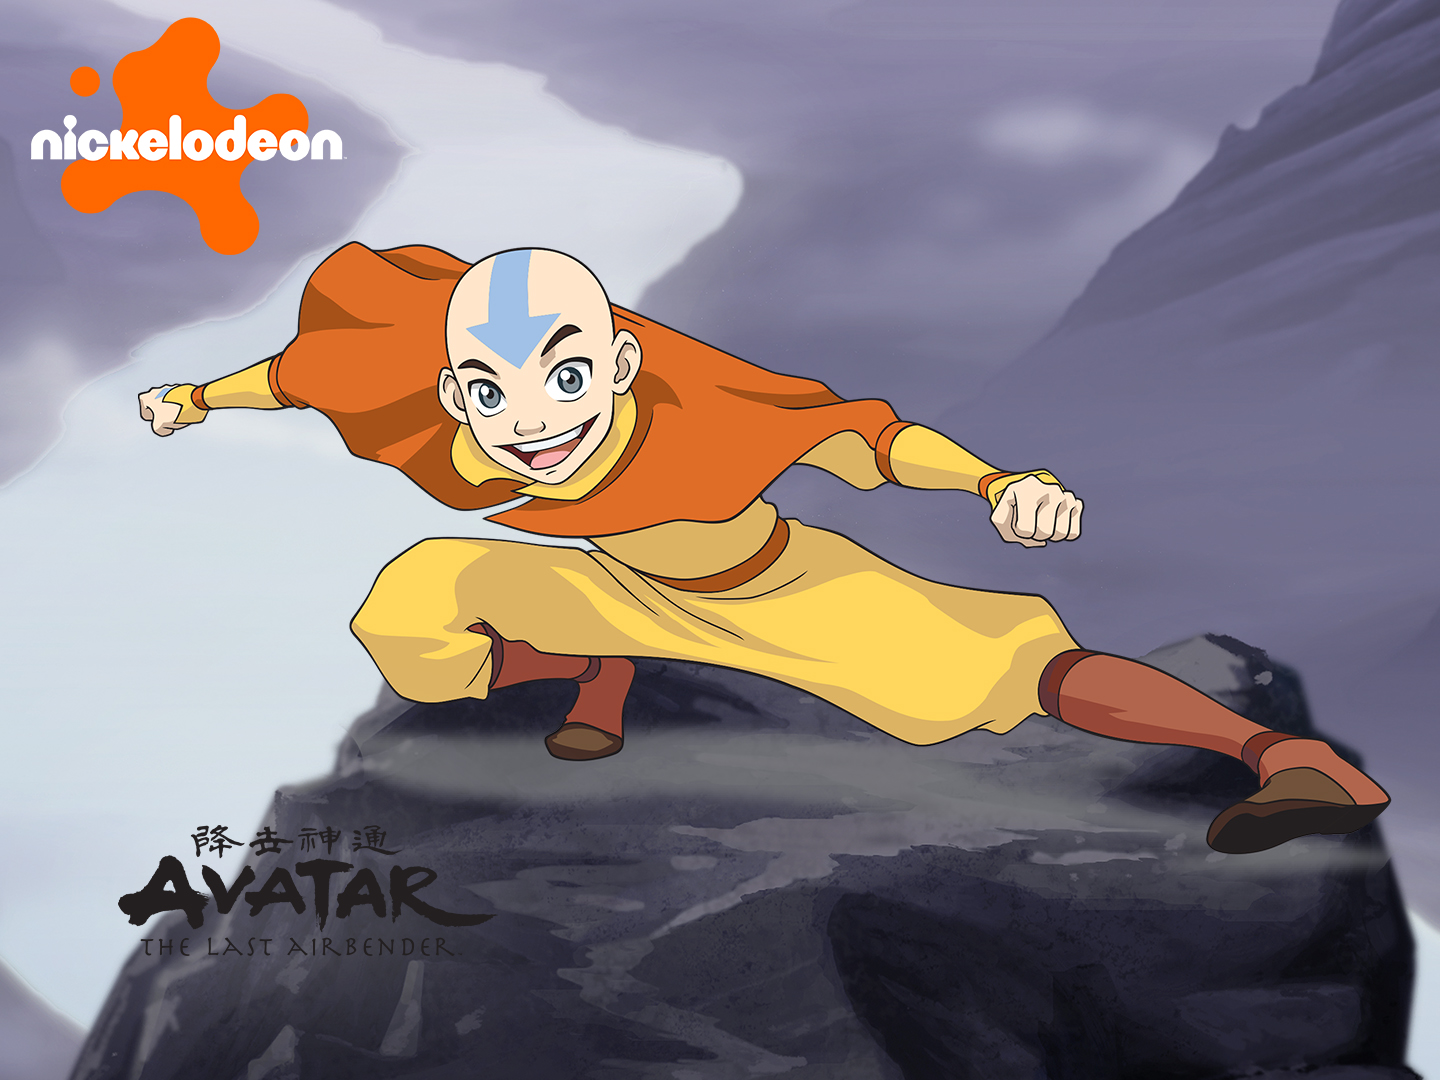 Avatar The Last Airbender S02E02 The Cave of Two Lovers Summary  Season  2 Episode 2 Guide